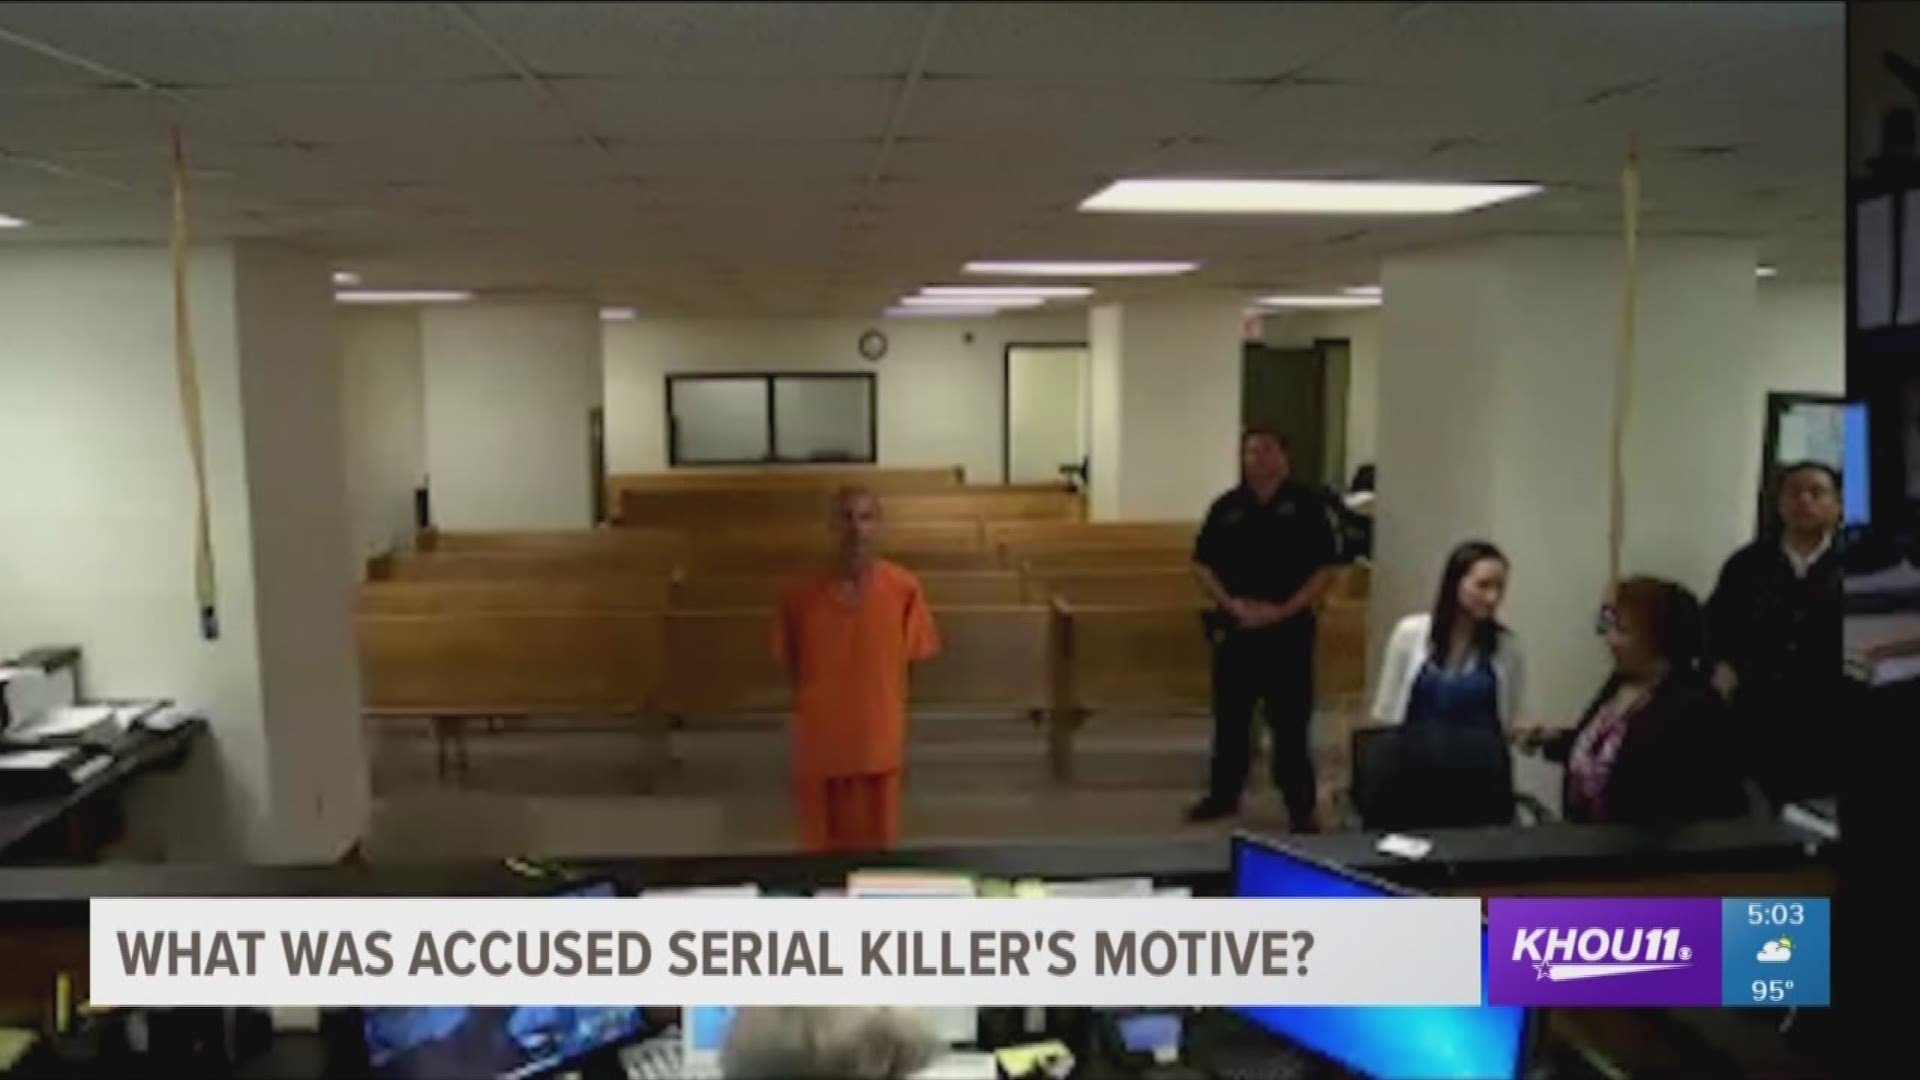 On Wednesday, a suspected serial killer appeared in court less than 24 hours after his arrest. 